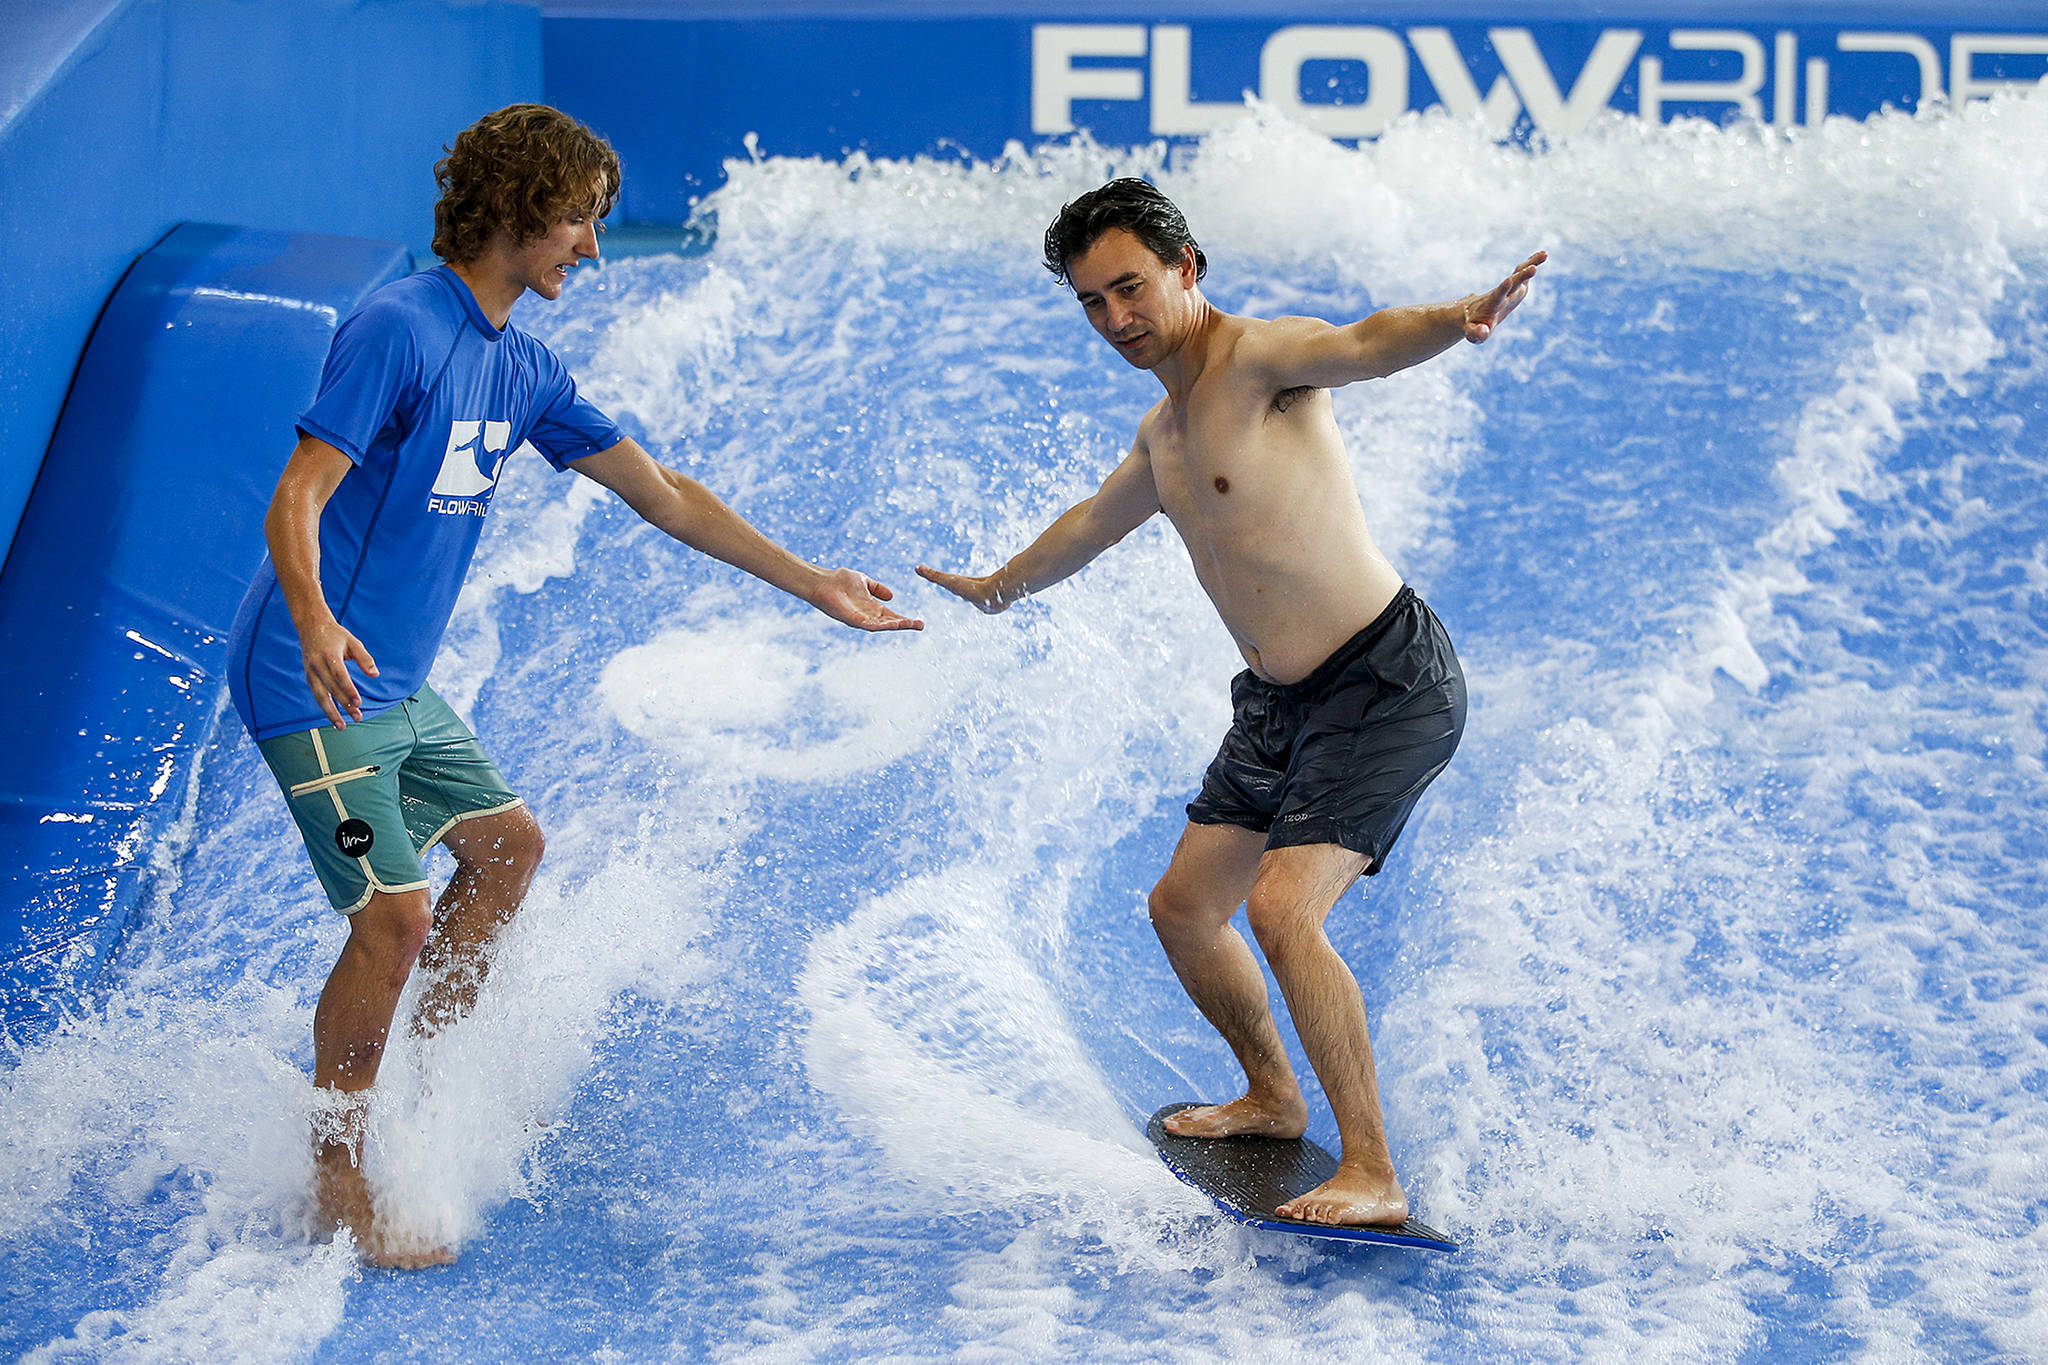 Herald columnist Nick Patterson (right) tries out the Flowrider with the help of instructor Evan Campbell at the Snohomish Aquatic Center on Tuesday, Aug. 29. (Ian Terry / The Herald)